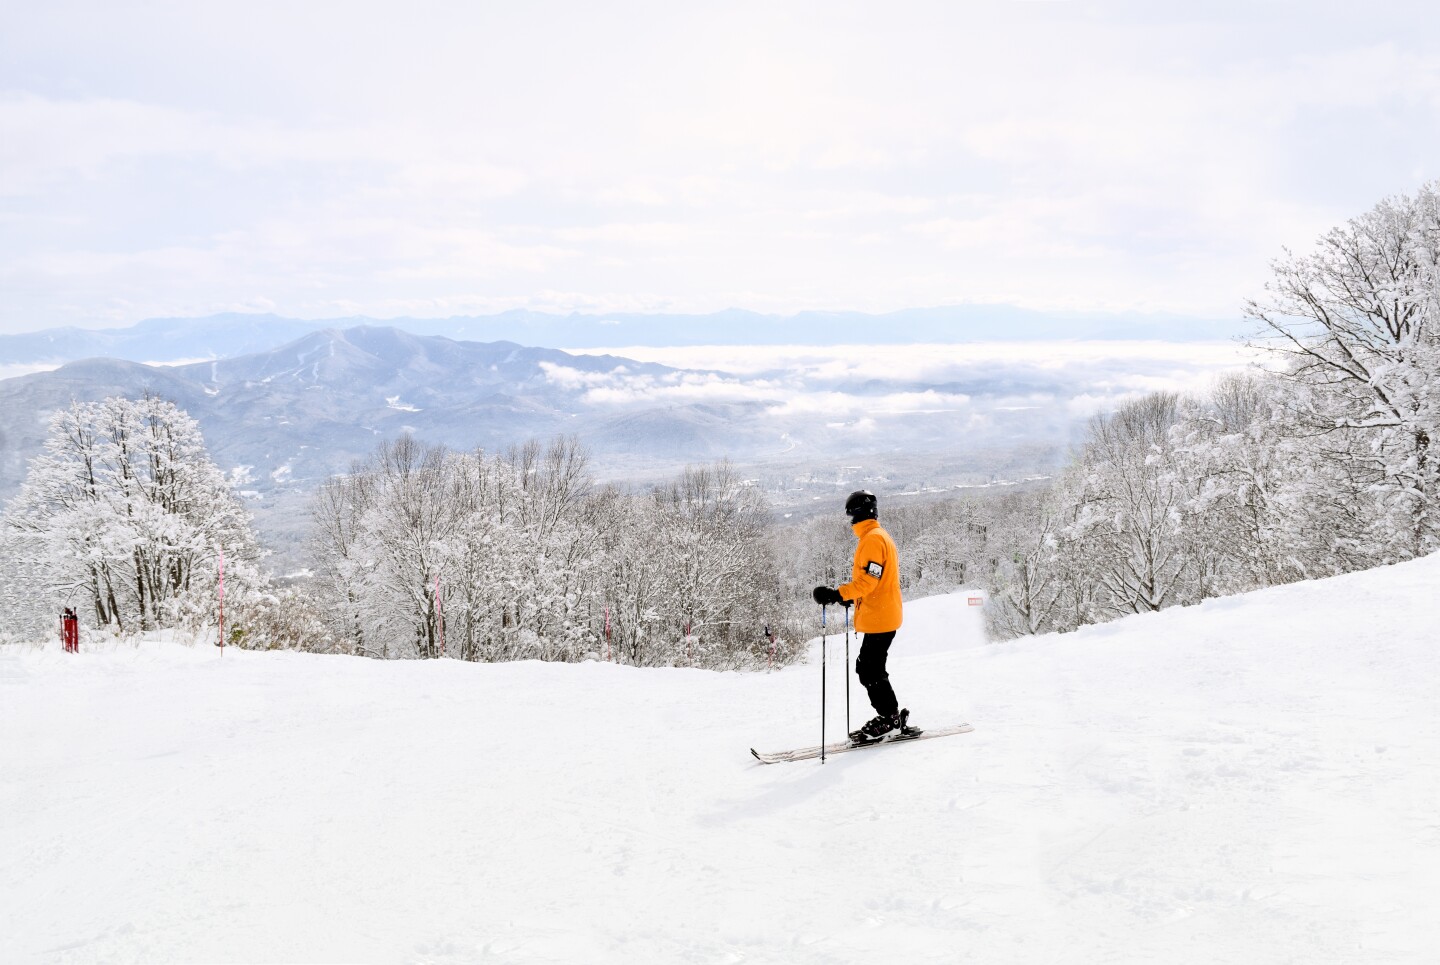 <h2>6. Myoko Kogen</h2> <ul>   <li><b>Location: </b>Myoko Kogen, Japan</li>   <li><b>Best for: </b>Powder, side- and backcountry skiing, Japanophiles looking to experience the country’s unique slope-side vending machine snacks </li>   <li><b>Where to stay:</b> <a class="Link" href="https://www.mountainhutmyoko.com/" rel="noopener">Mountain Hut Myoko</a><i>: </i>Located at the base of <a class="Link" href="https://myokotourism.com/ikenotaira-onsen-ski-resort/" rel="noopener">Ikenotaira ski resort</a>, this stylish lodge also has private chalet rentals, surrounded by incredible views and an enchanting, calming Japanese design, plush bedding, and super-warm showers. </li>  </ul> <p>The Myoko Kogen ski area fuses traditional Japanese charm and culture with world-class skiing, natural beauty, and challenging slopes for advanced skiers. Those looking to enjoy long runs and plenty of backcountry routes will savor their stay at any of Myoko Kogen’s many resorts. Upon arrival, powder enthusiasts will float, as the region receives more than 42 feet of snowfall each year. Visitors can enjoy everything from Yakatori and braised pork to squid ink udon in the central area around Akakura Onsen, as well as karaoke and traditional Japanese pubs.</p> <p>Another charm of skiing at Myoko Kogen are the natural hot springs known as <a class="Link" href="https://www.afar.com/magazine/best-onsen-hot-springs-japan" rel="noopener">onsen</a>, which abound near Mount Myoko. Soaking in hot springs rejuvenates tired muscles and will have skiers ready to head out for a new adventure soon.</p>